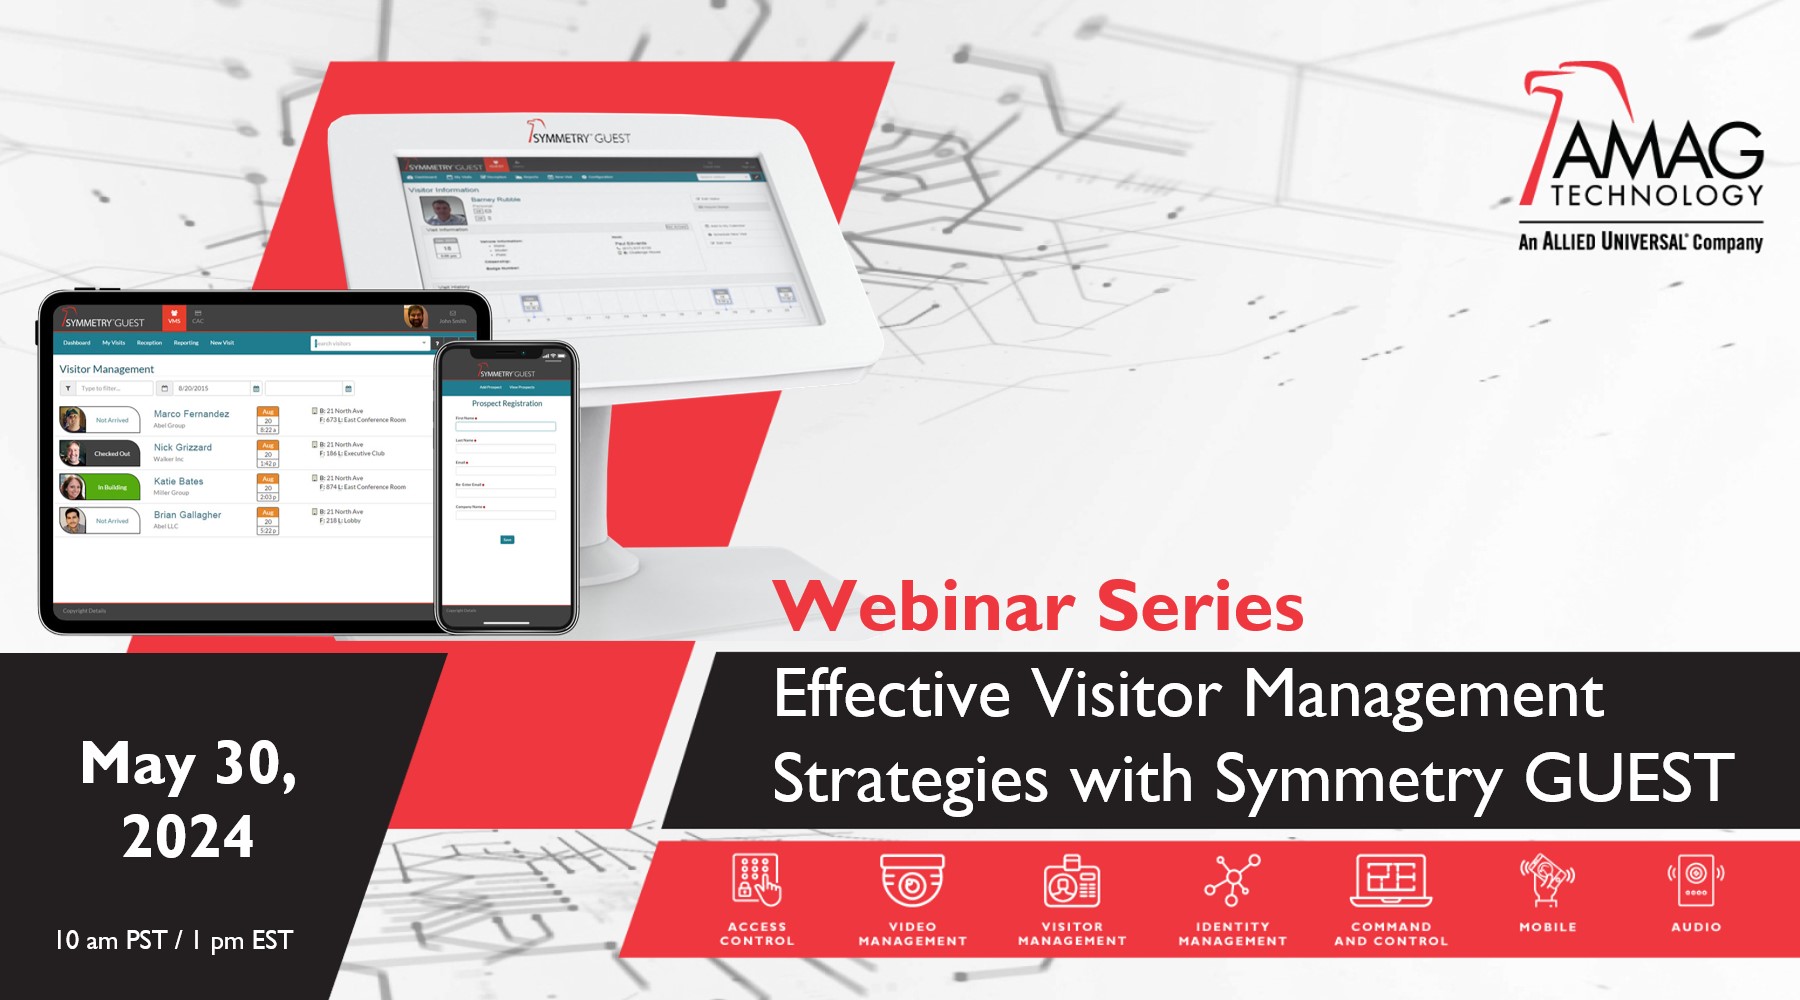 Effective Visitor Management Strategies with Symmetry GUEST